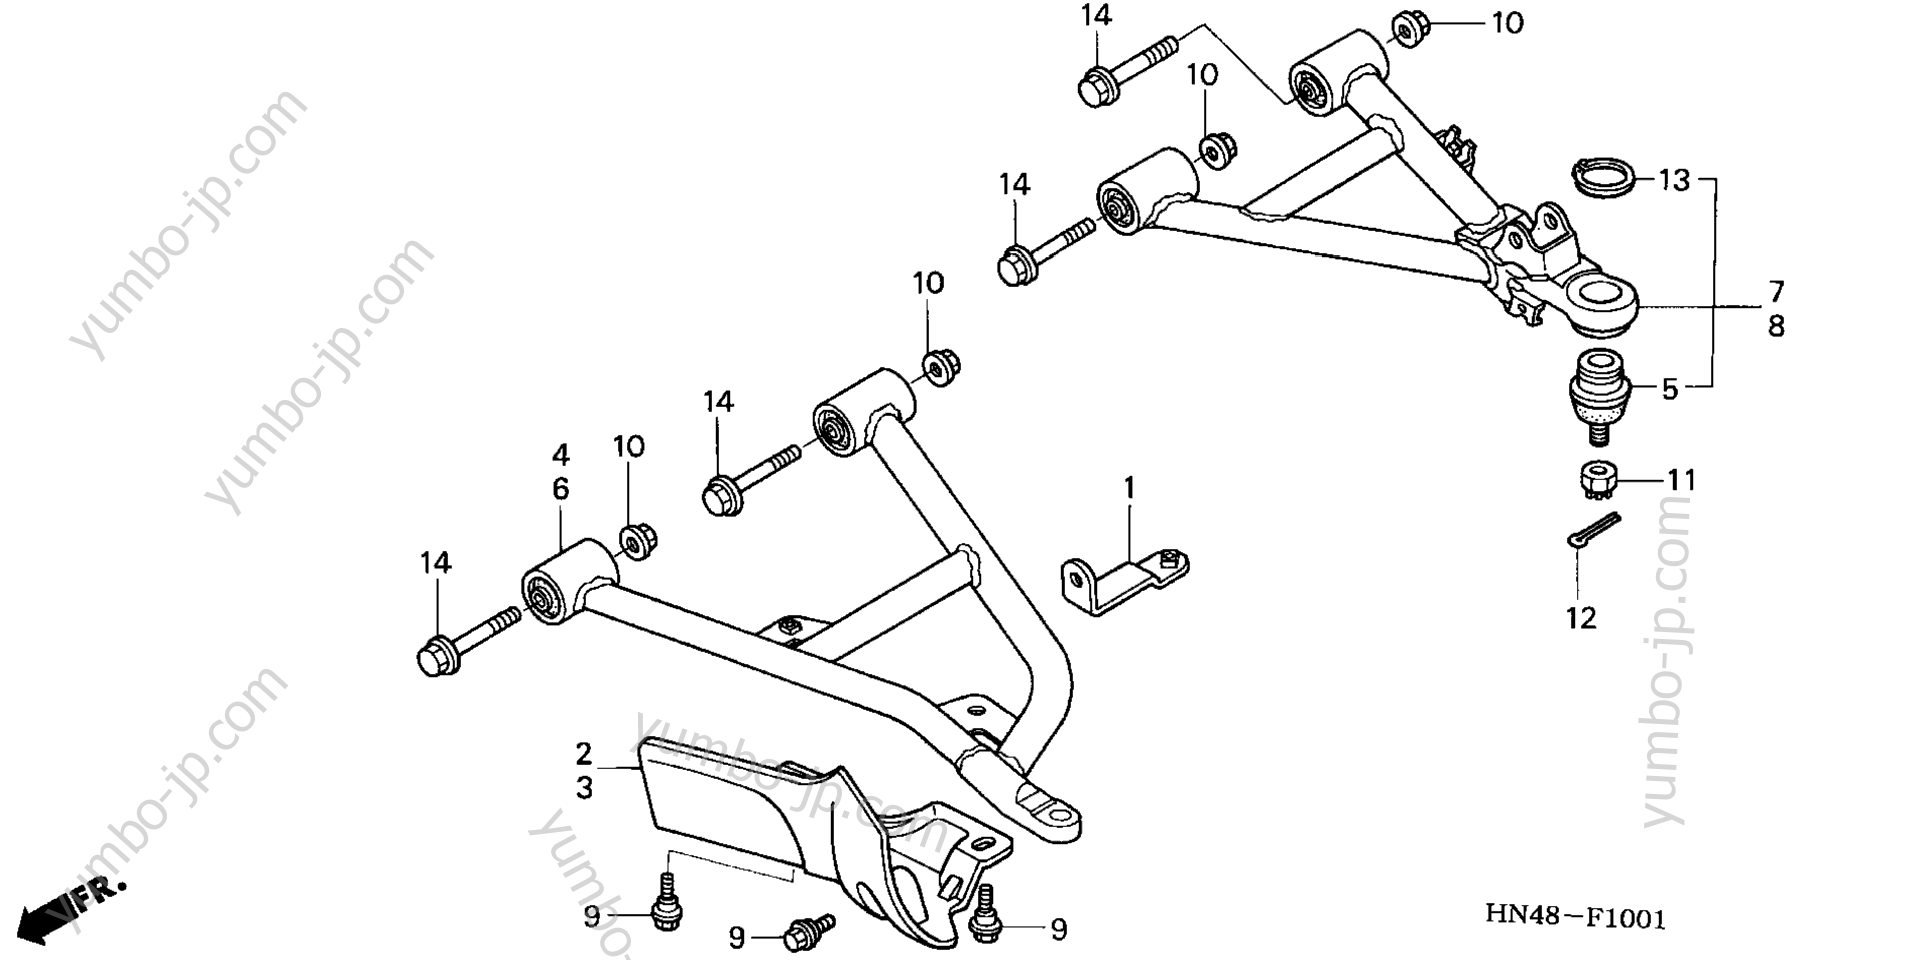 FRONT ARM (4WD) for ATVs HONDA TRX350FE 2A 2004 year